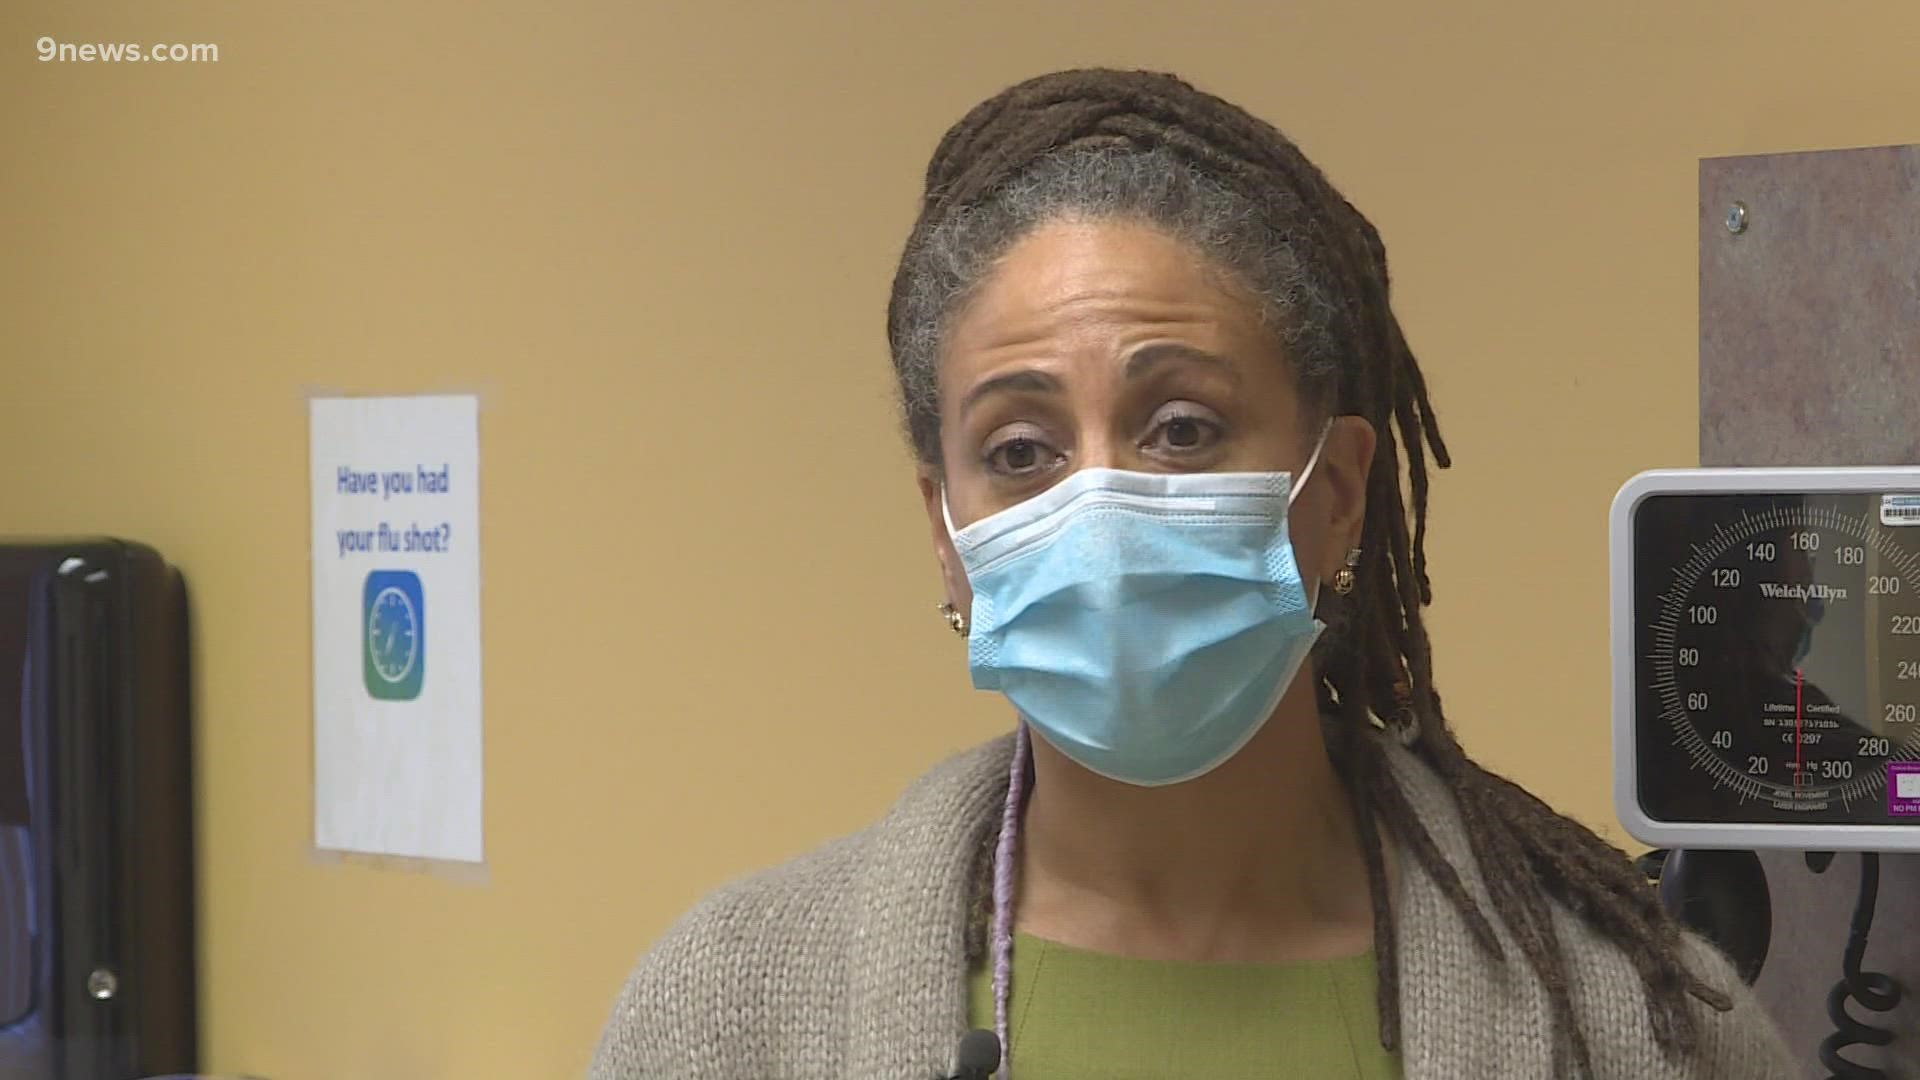 A Denver lung doctor says cystic fibrosis is sometimes misdiagnosed because of a person's race. She helped create an online tool to give people the right information